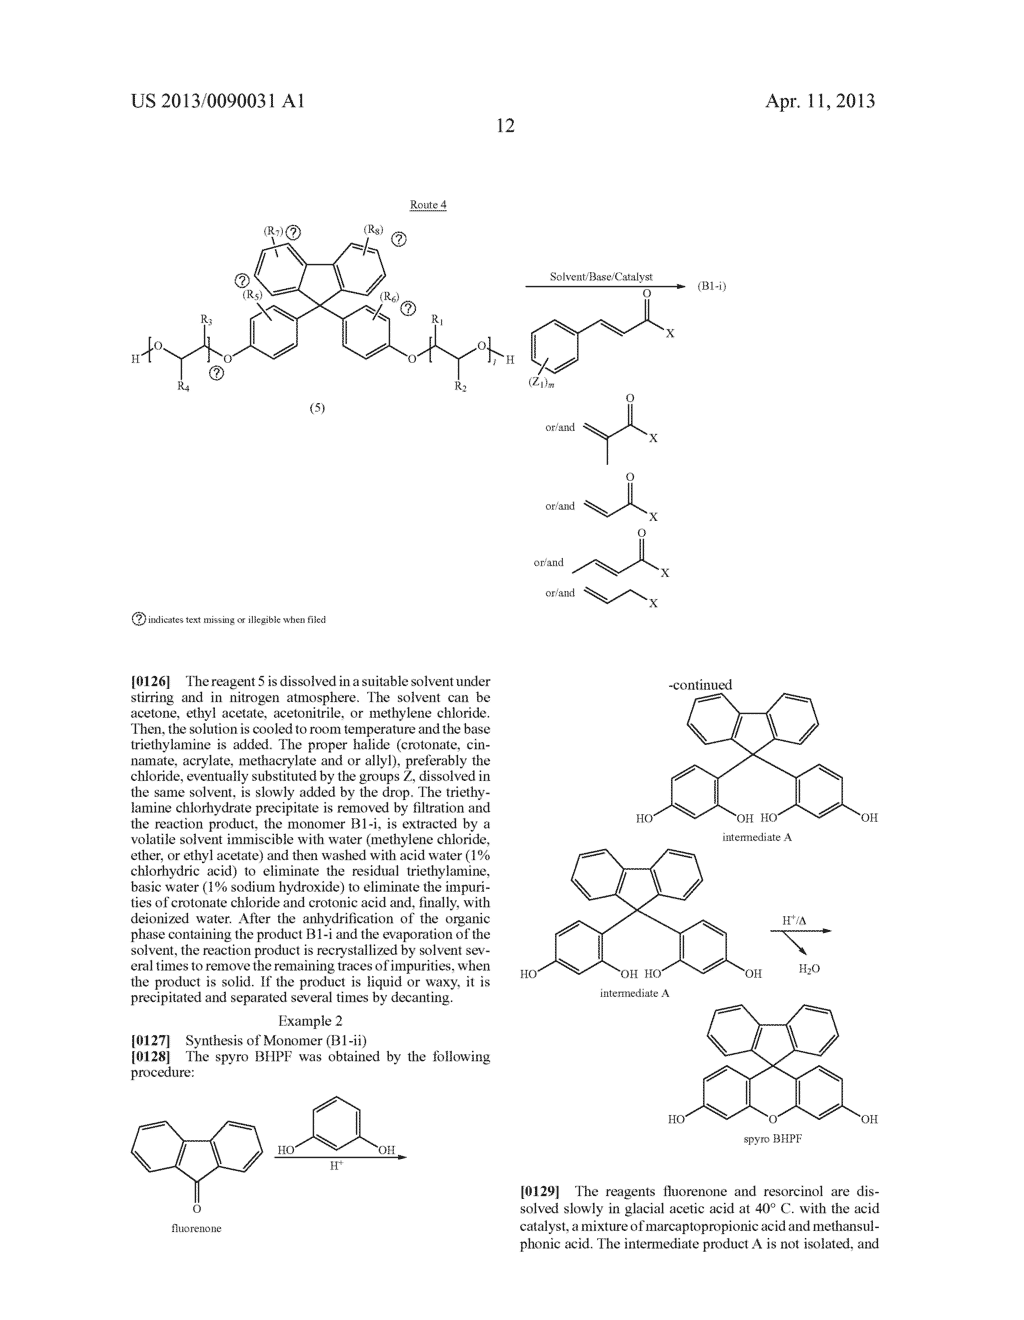 COMPOSITE FILM MATERIAL COMPRISING A RESIN OF FLUORENE CROTONATE, FLUORENE     CINNAMATE, FLUORENE ACRYLATE, FLUORENE METHACRYLATE, FLUORENE ALLYLETHER     OR A COMBINATION THEREOF - diagram, schematic, and image 16